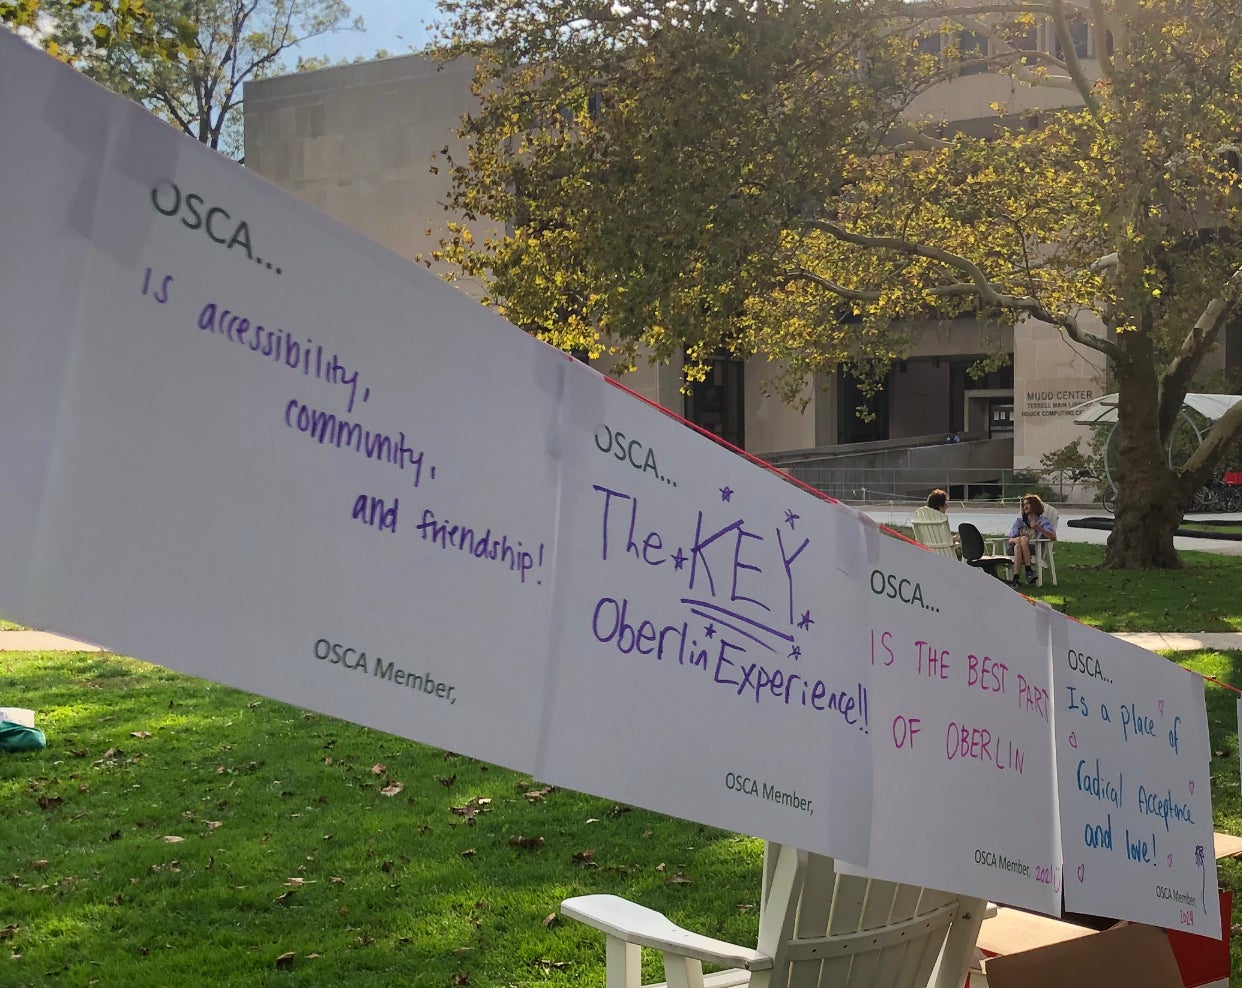 Papers with the text "OSCA..." with various responses written such as "is accessibility, community, and friendship!" "The KEY Oberlin Experience!!" and more.